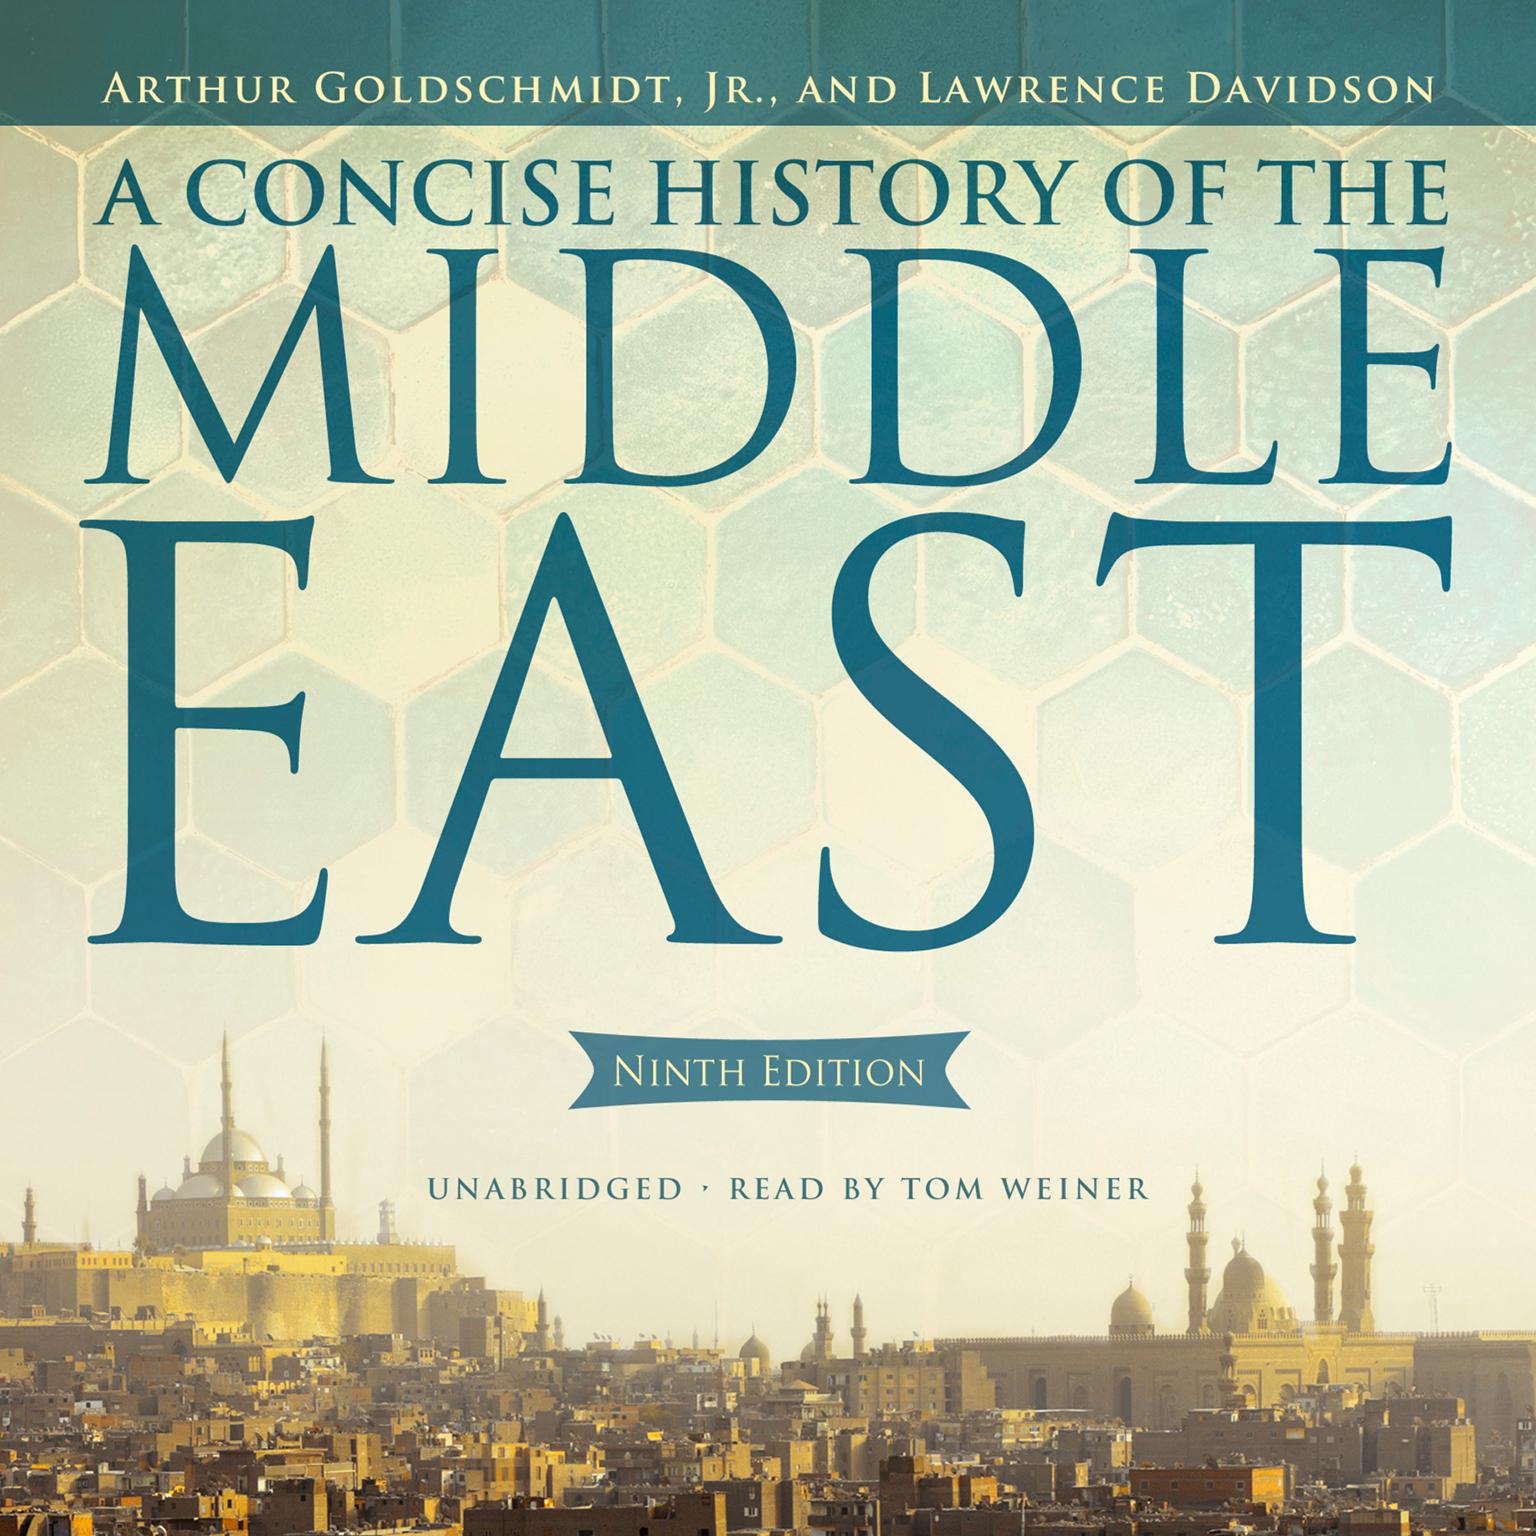 A Concise History of the Middle East, Ninth Edition Audiobook, by Arthur Goldschmidt